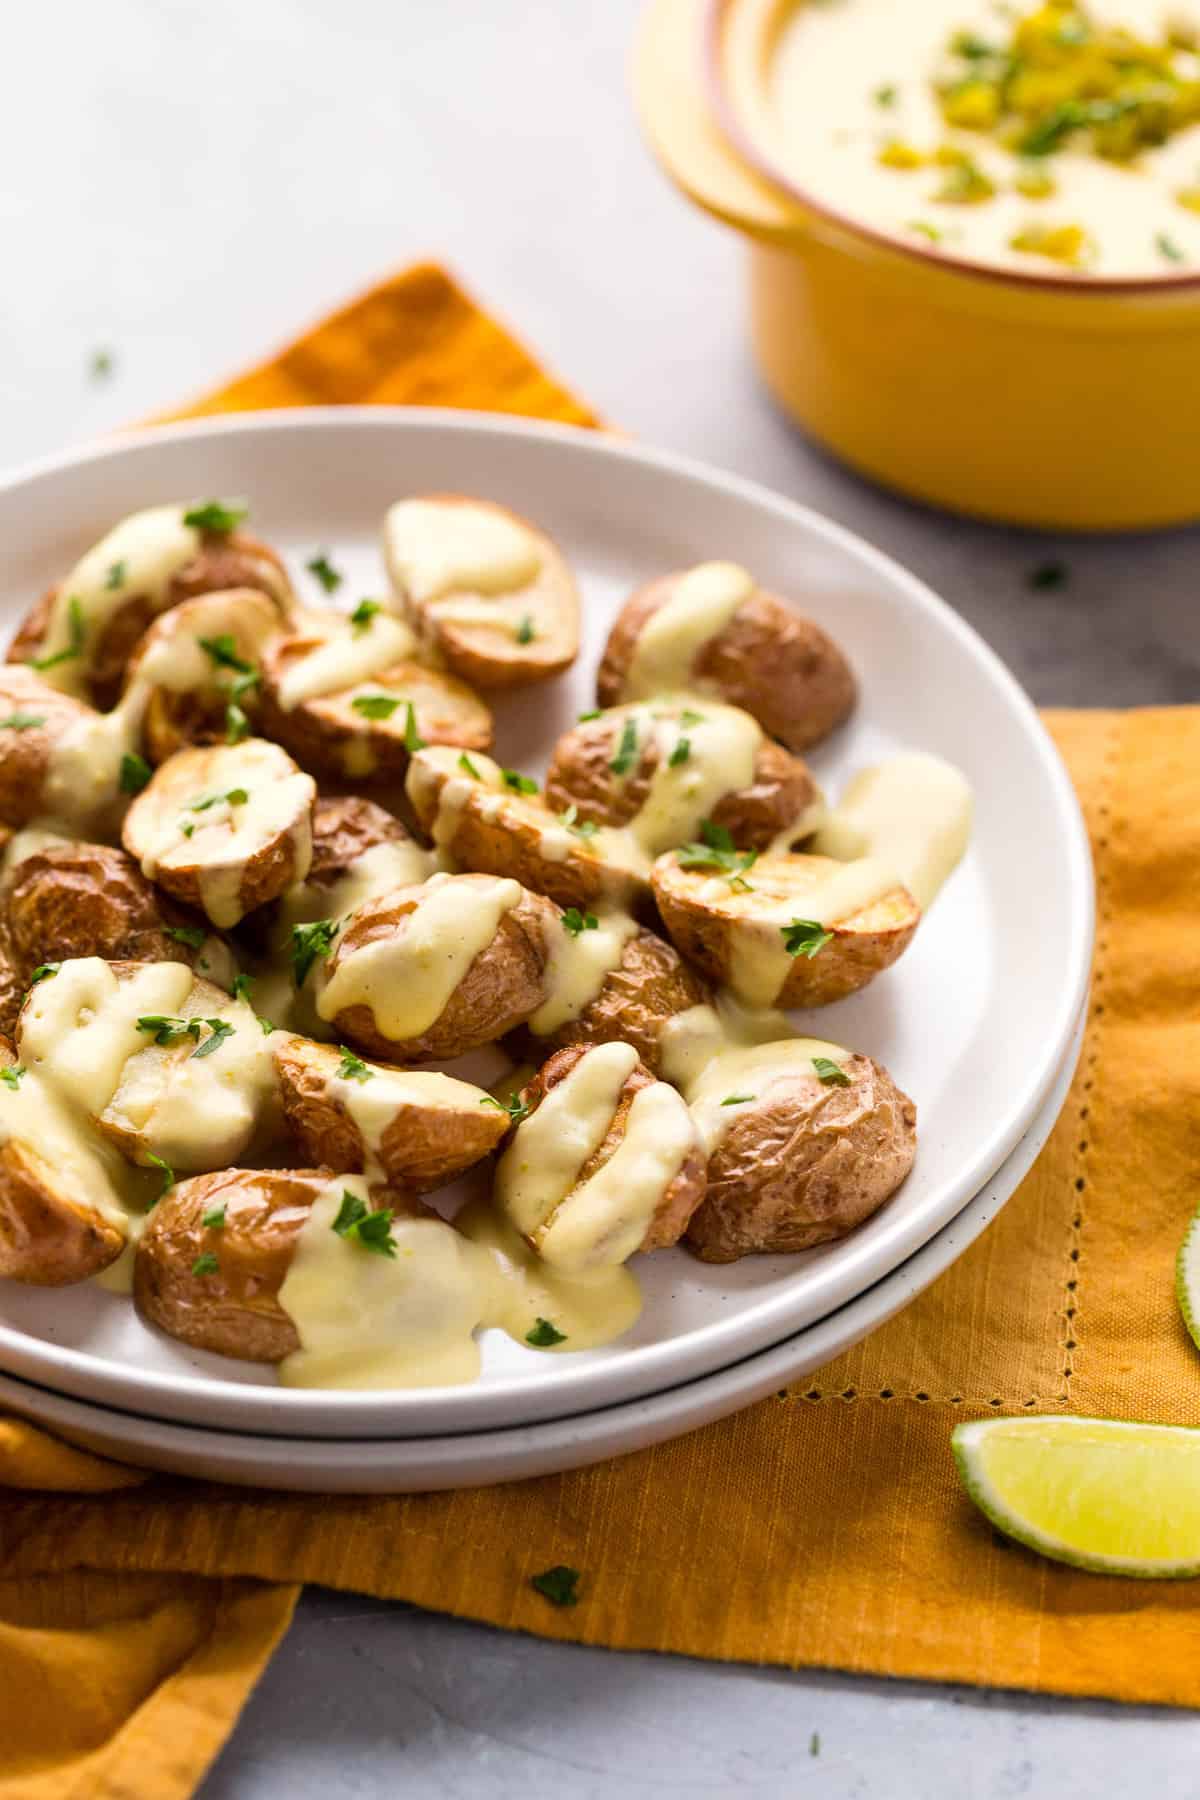 Roasted potatoes drizzled with vegan queso and sprinkled with fresh herbs.